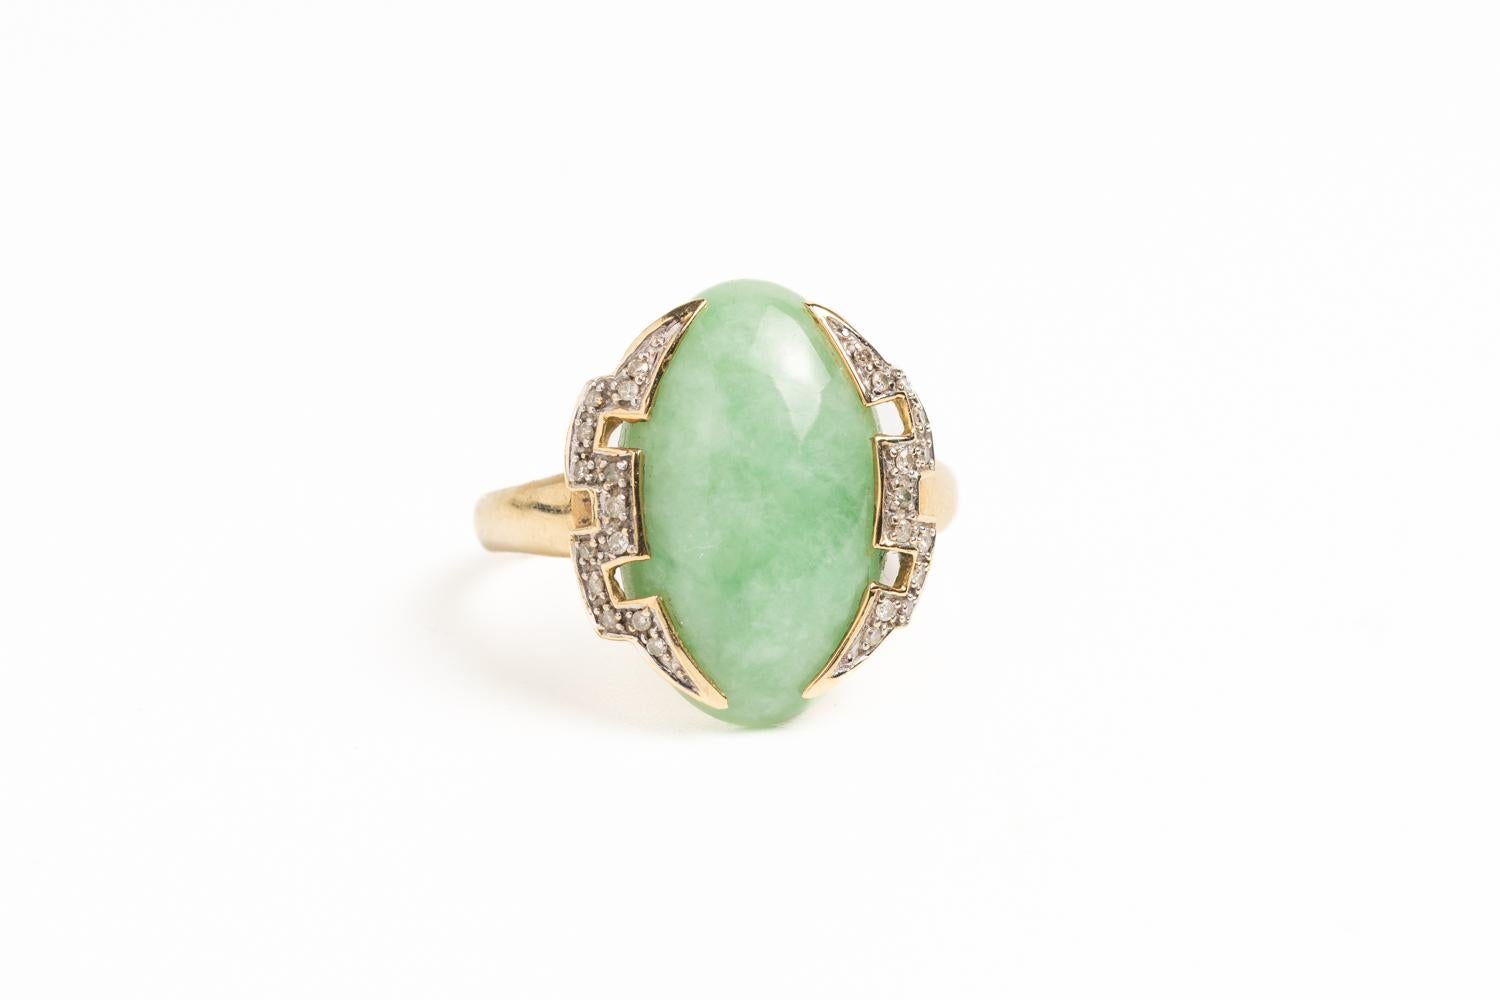 An elegant and gorgeous 9ct gold jade and diamond cocktail ring made in Art Deco style, comprising of a beautiful oval light green cabochon stone measuring approx. 22mm X 12mm. 

The central jade stone is surrounded by sparking diamonds in a